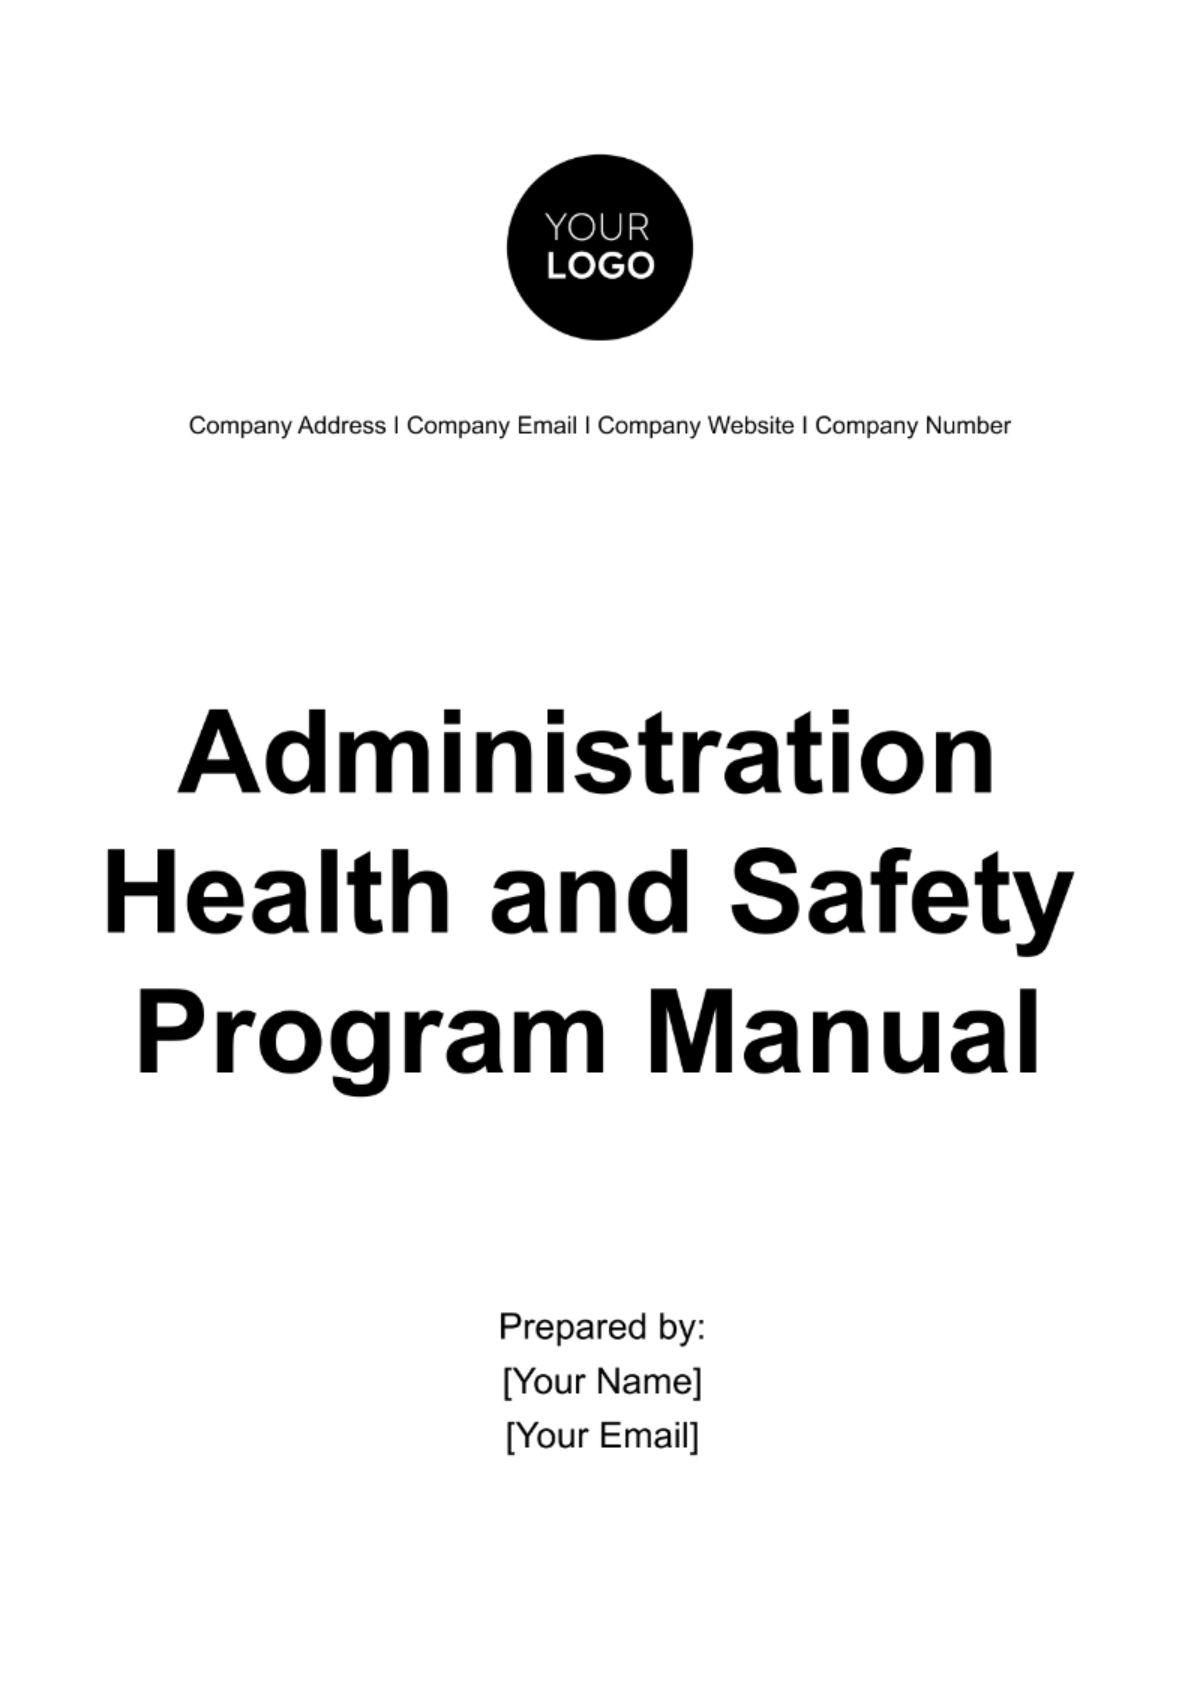 Free Administration Health and Safety Program Manual Template